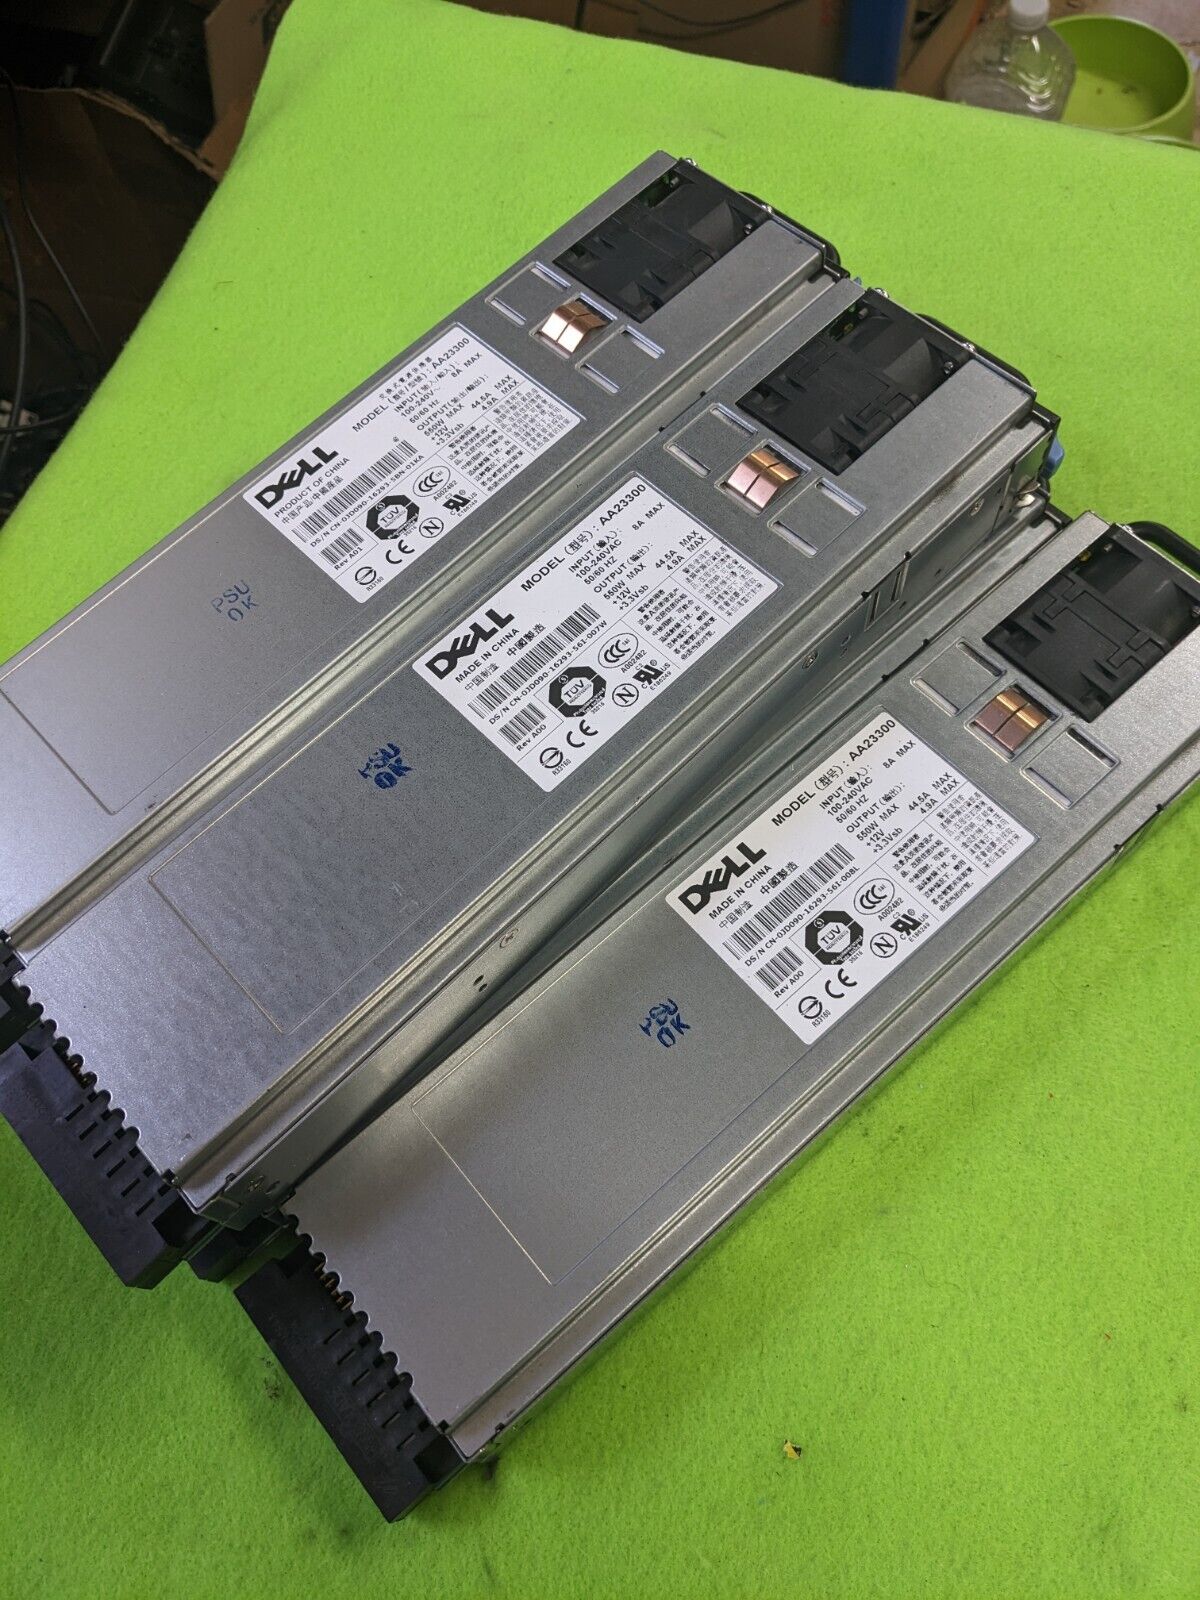 LOT OF 5 Dell 550W Redundant Power Supply for PE 1850 0JD090 AA23300 110-240VAC